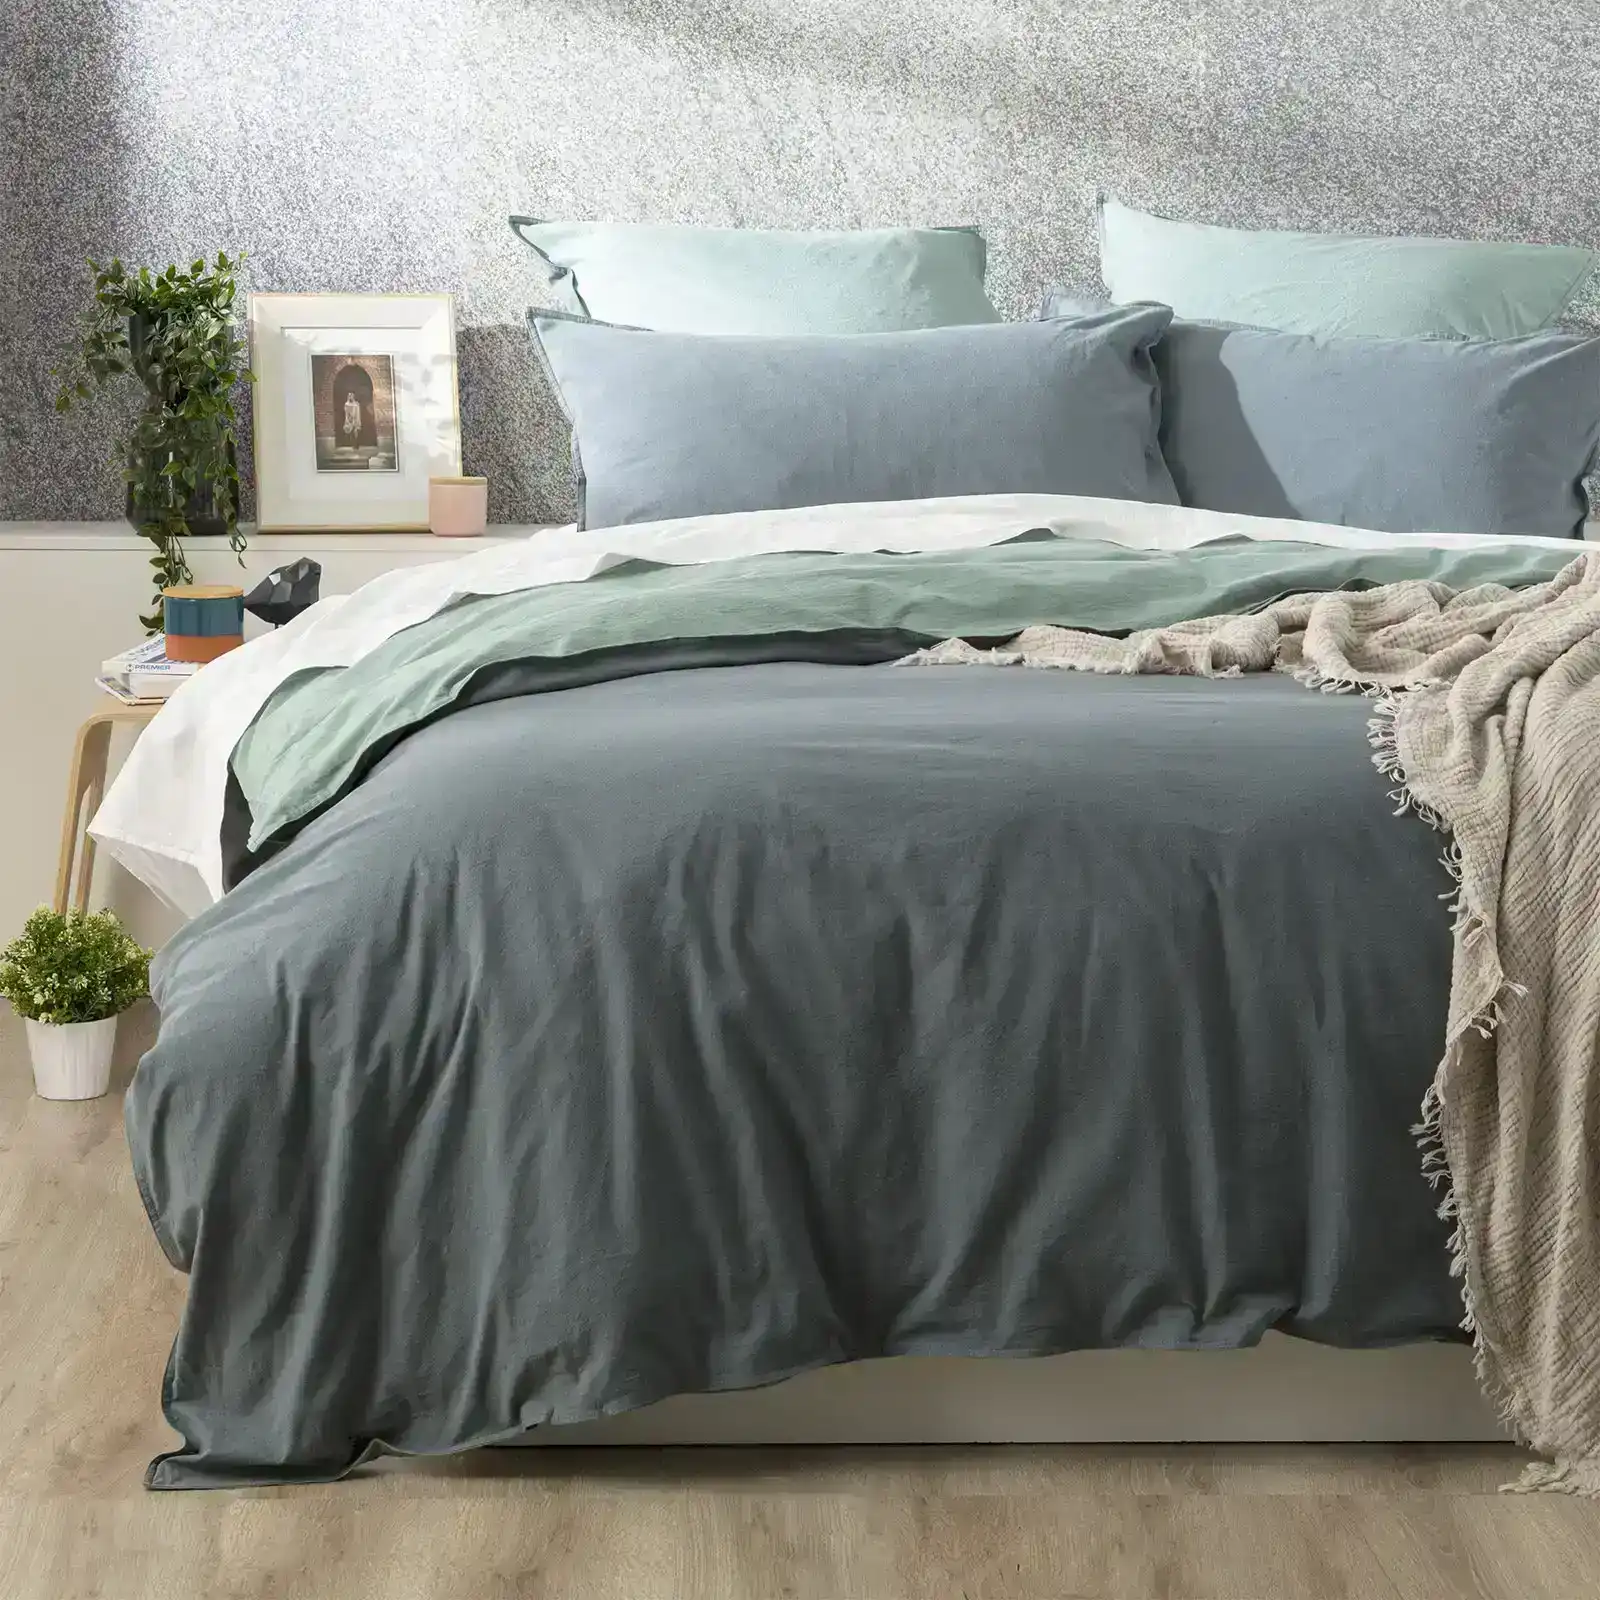 Renee Taylor Essentials King Bed Quilt Cover VT Stone Washed Reversible Mineral